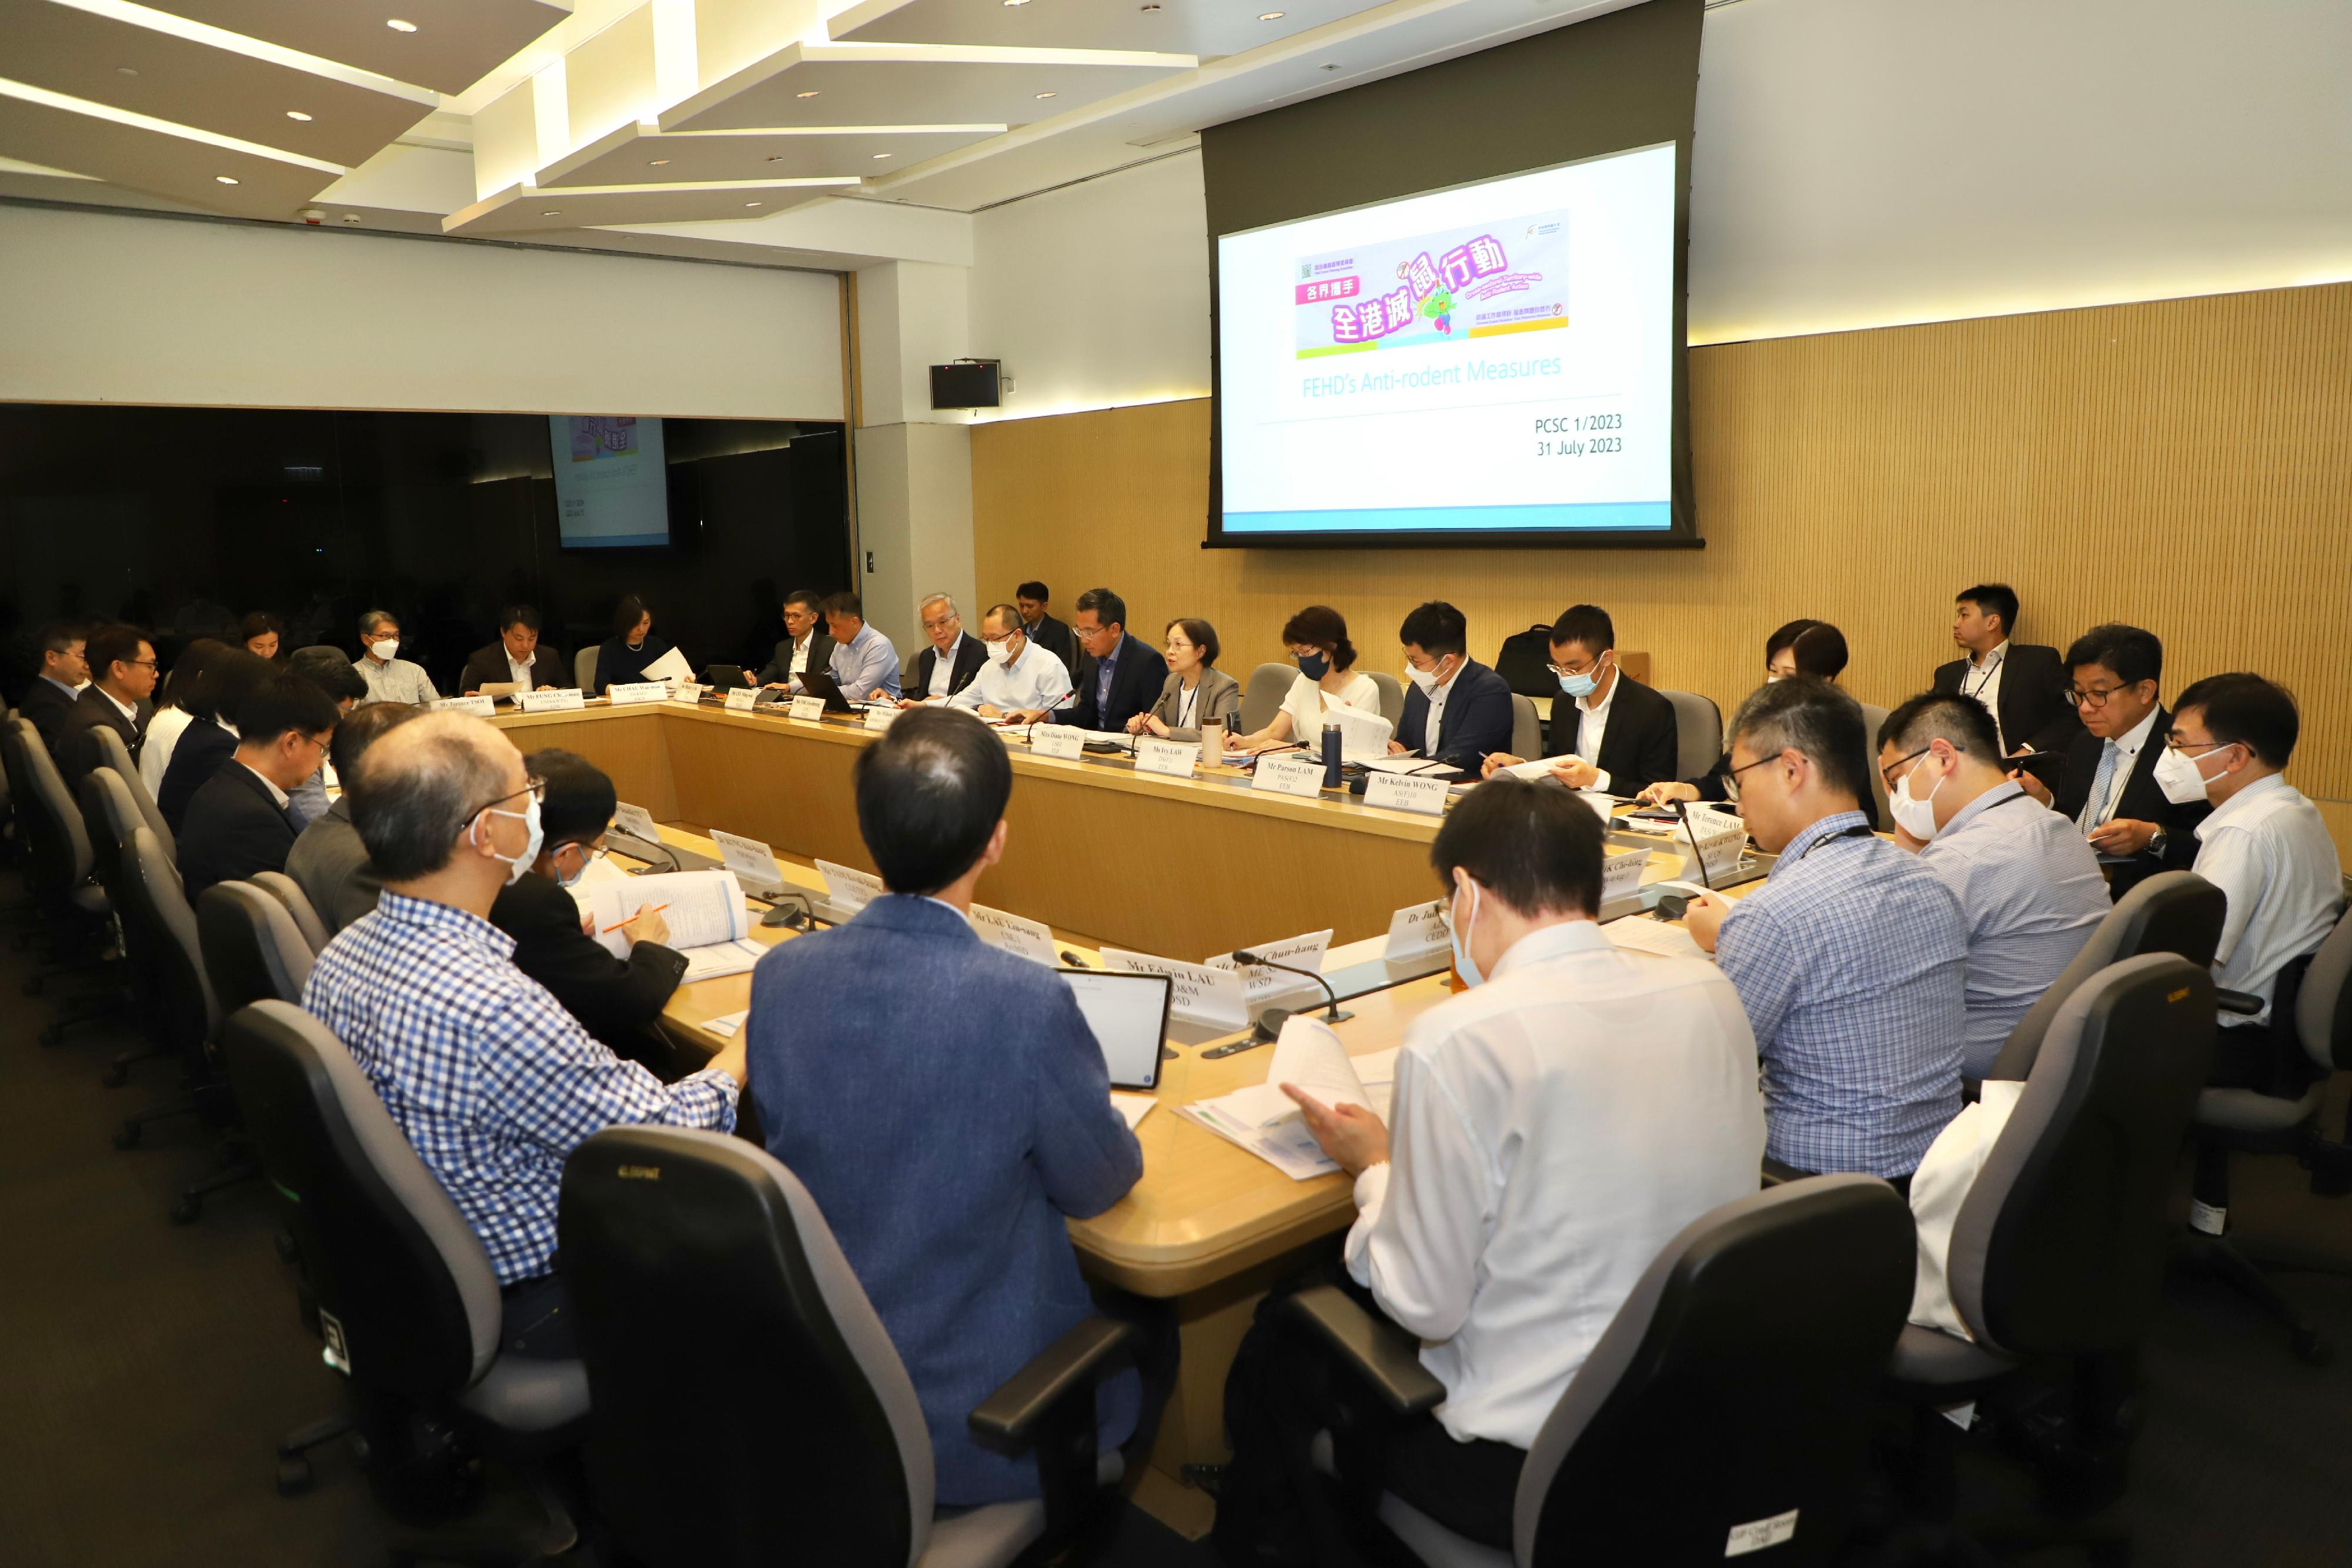 The interdepartmental Pest Control Steering Committee meeting is held today (July 31). The meeting was chaired by the Under Secretary for Environment and Ecology, Miss Diane Wong. Participants of the meeting came from three policy bureaux and 20 government departments and organisations.